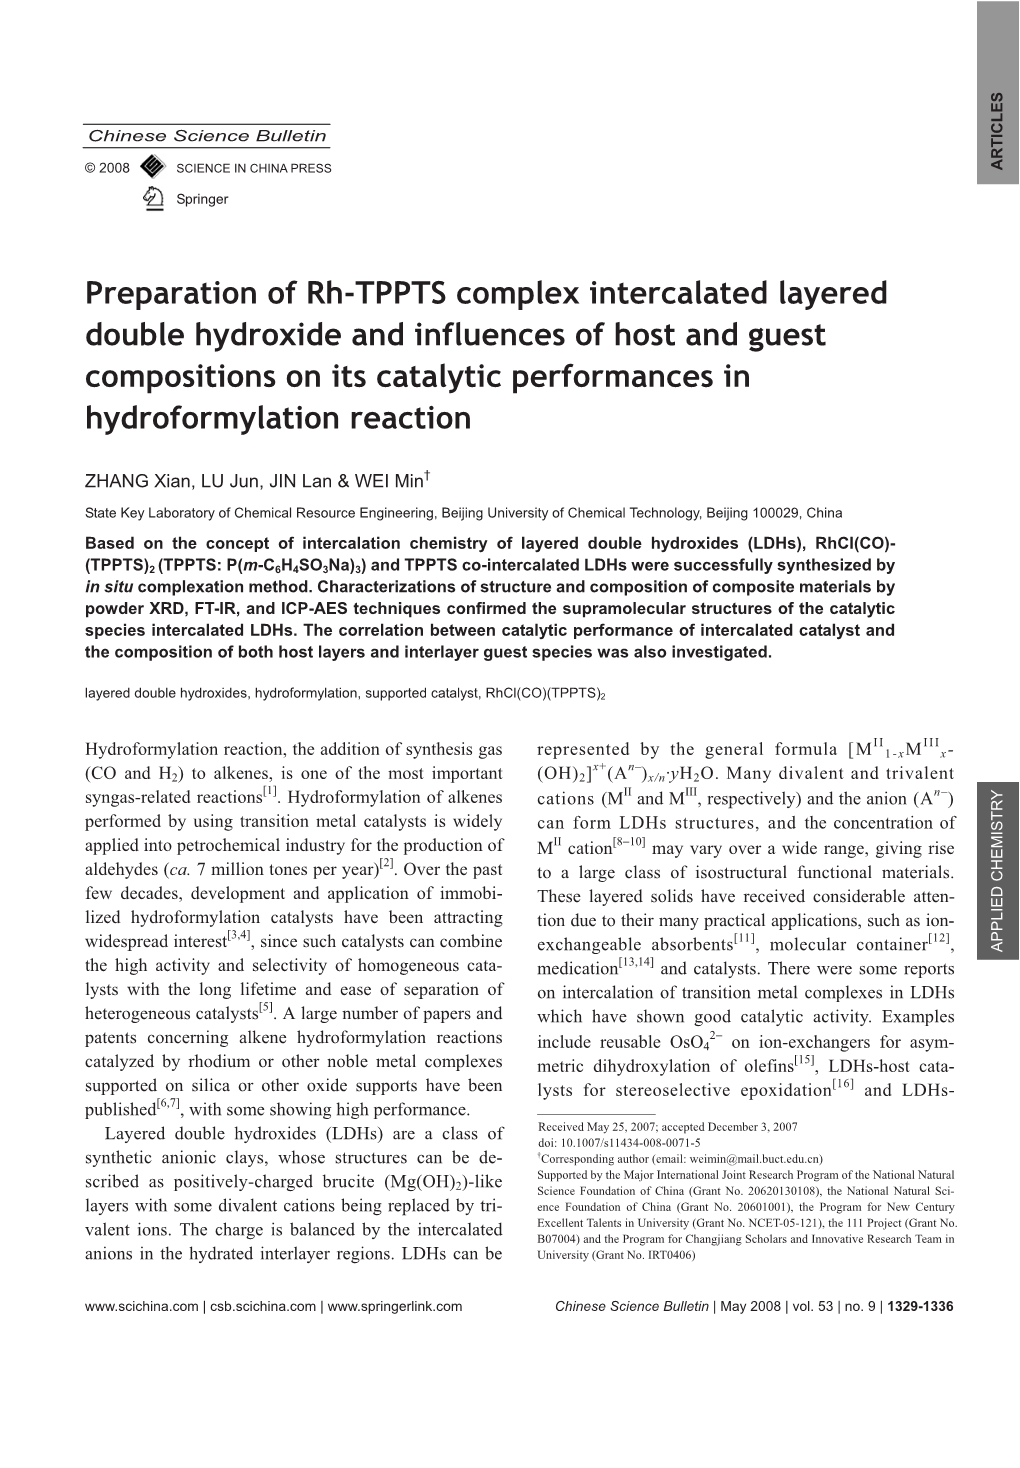 Preparation of Rh-TPPTS Complex Intercalated Layered Double